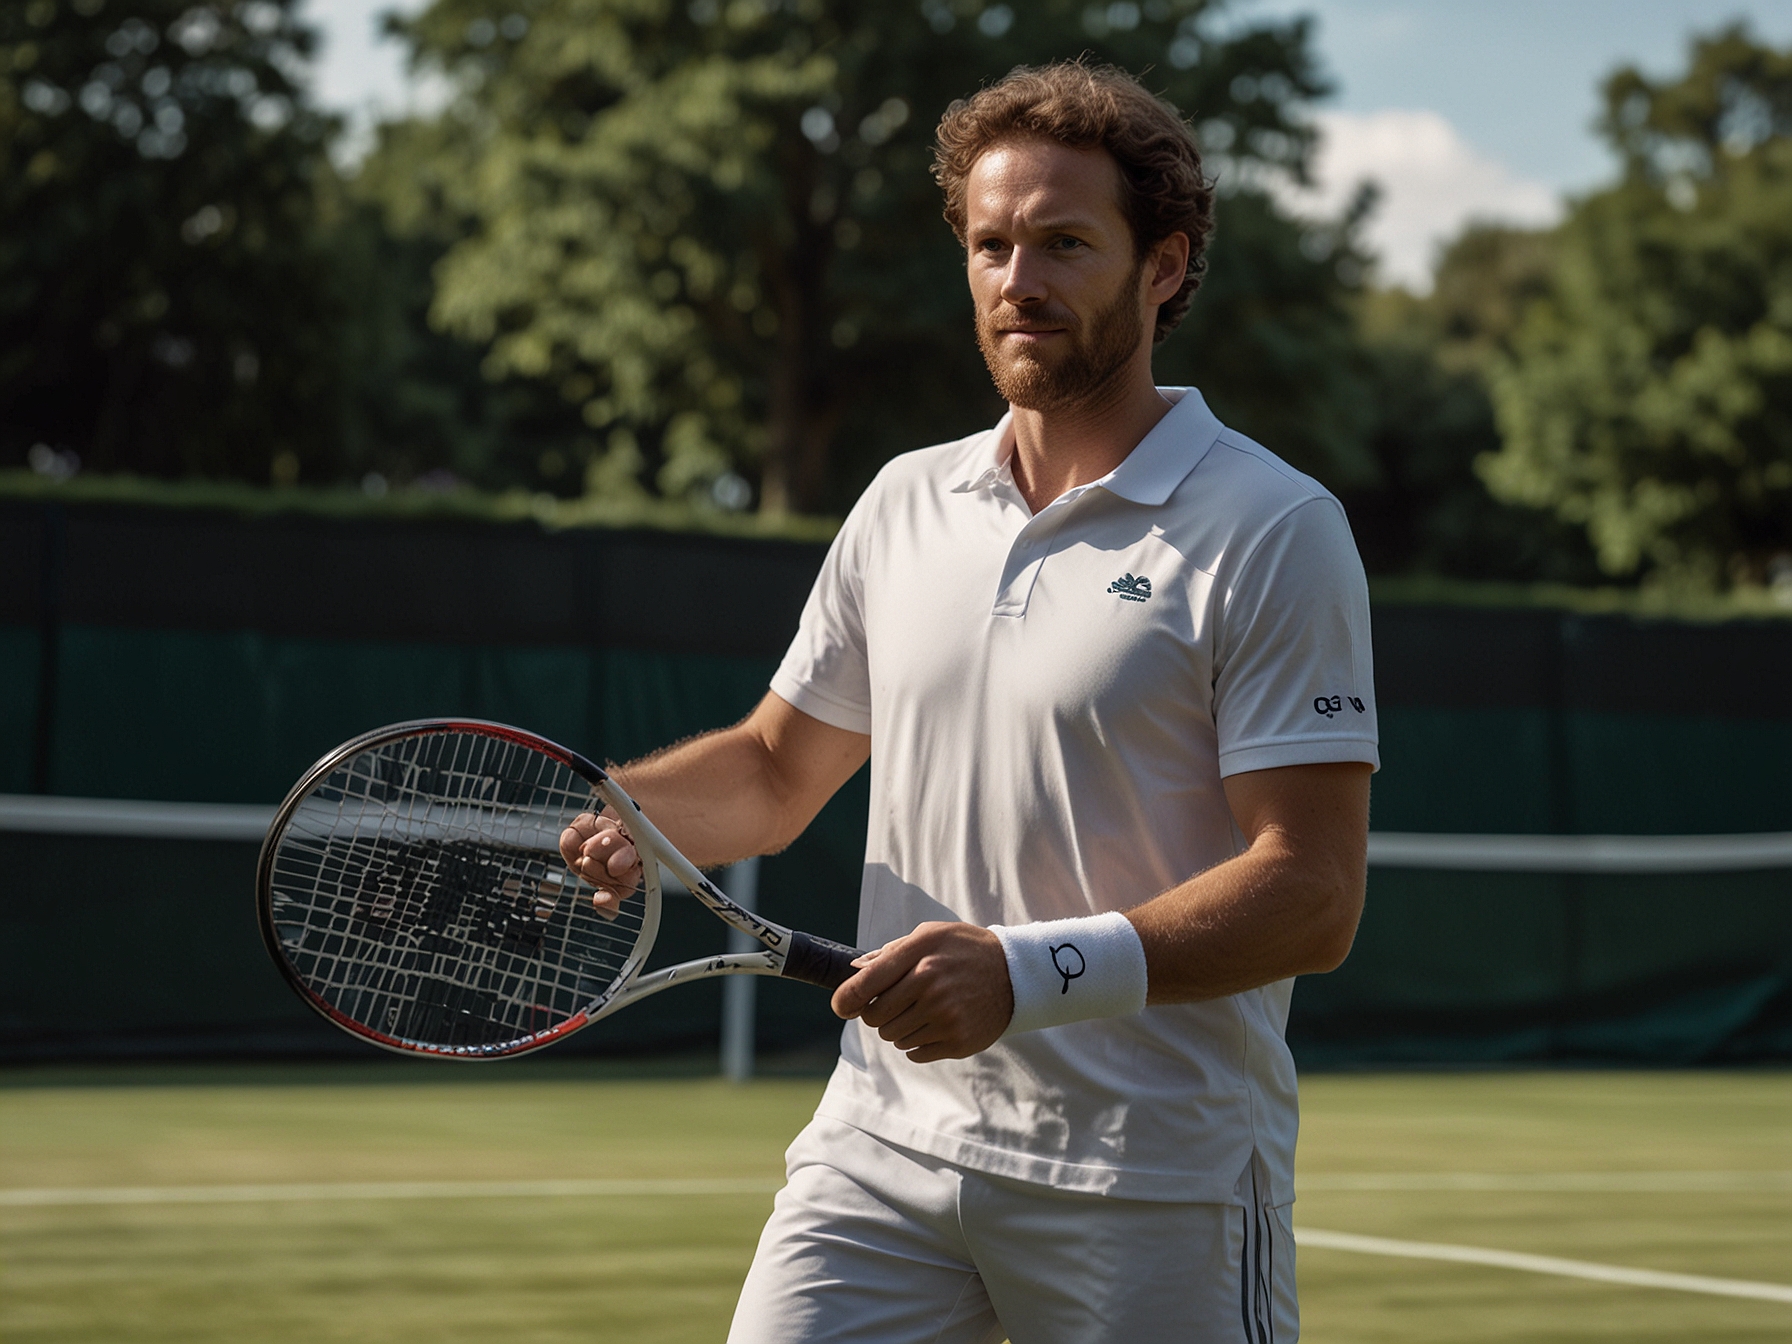 Marcus Daniell holding a tennis racket on a Wimbledon court, symbolizing his journey as a professional athlete and his commitment to donating prize money to charity.